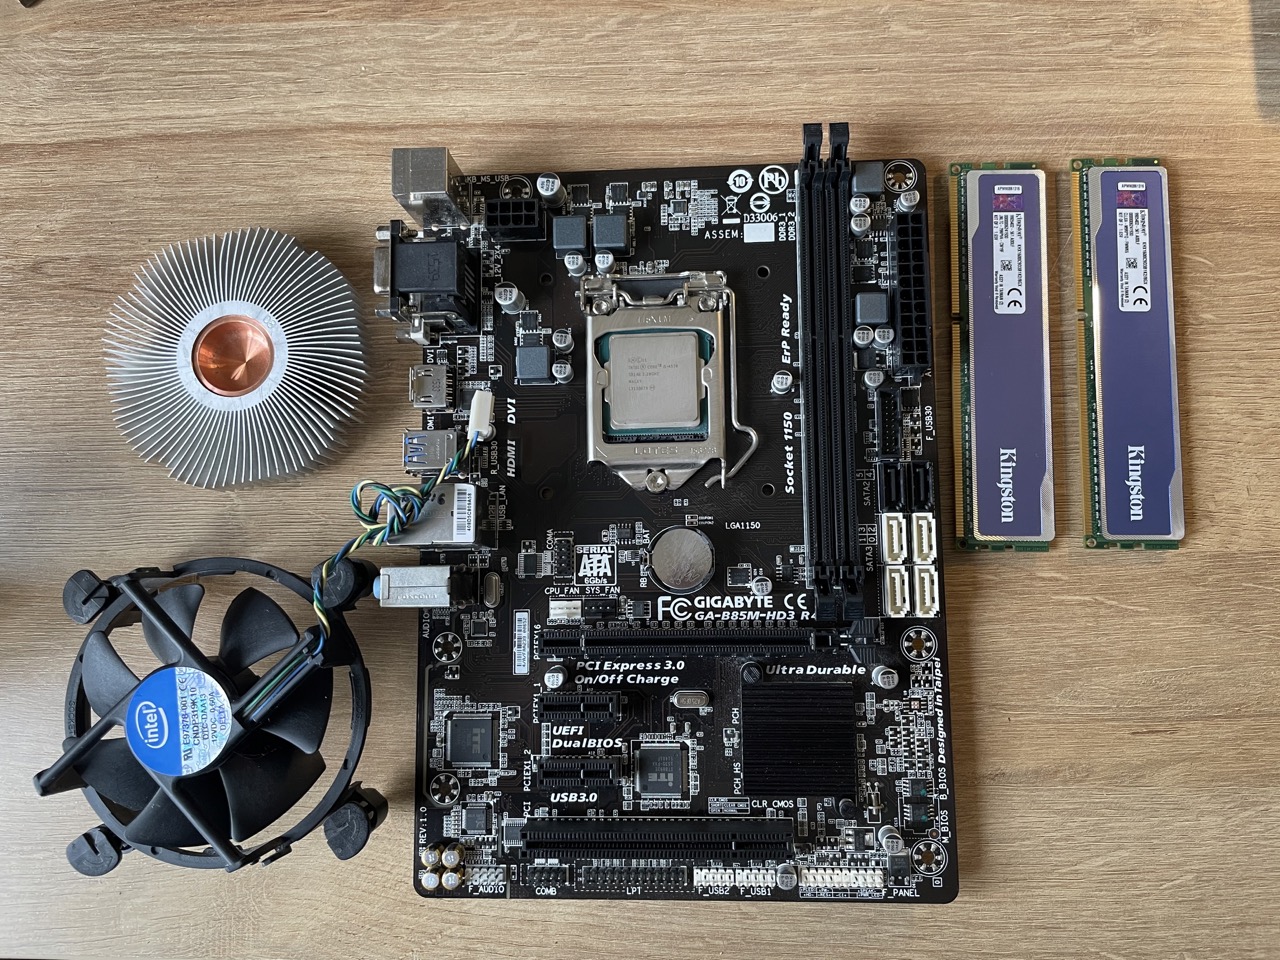 Motherboard looking brand new after the cleaning service